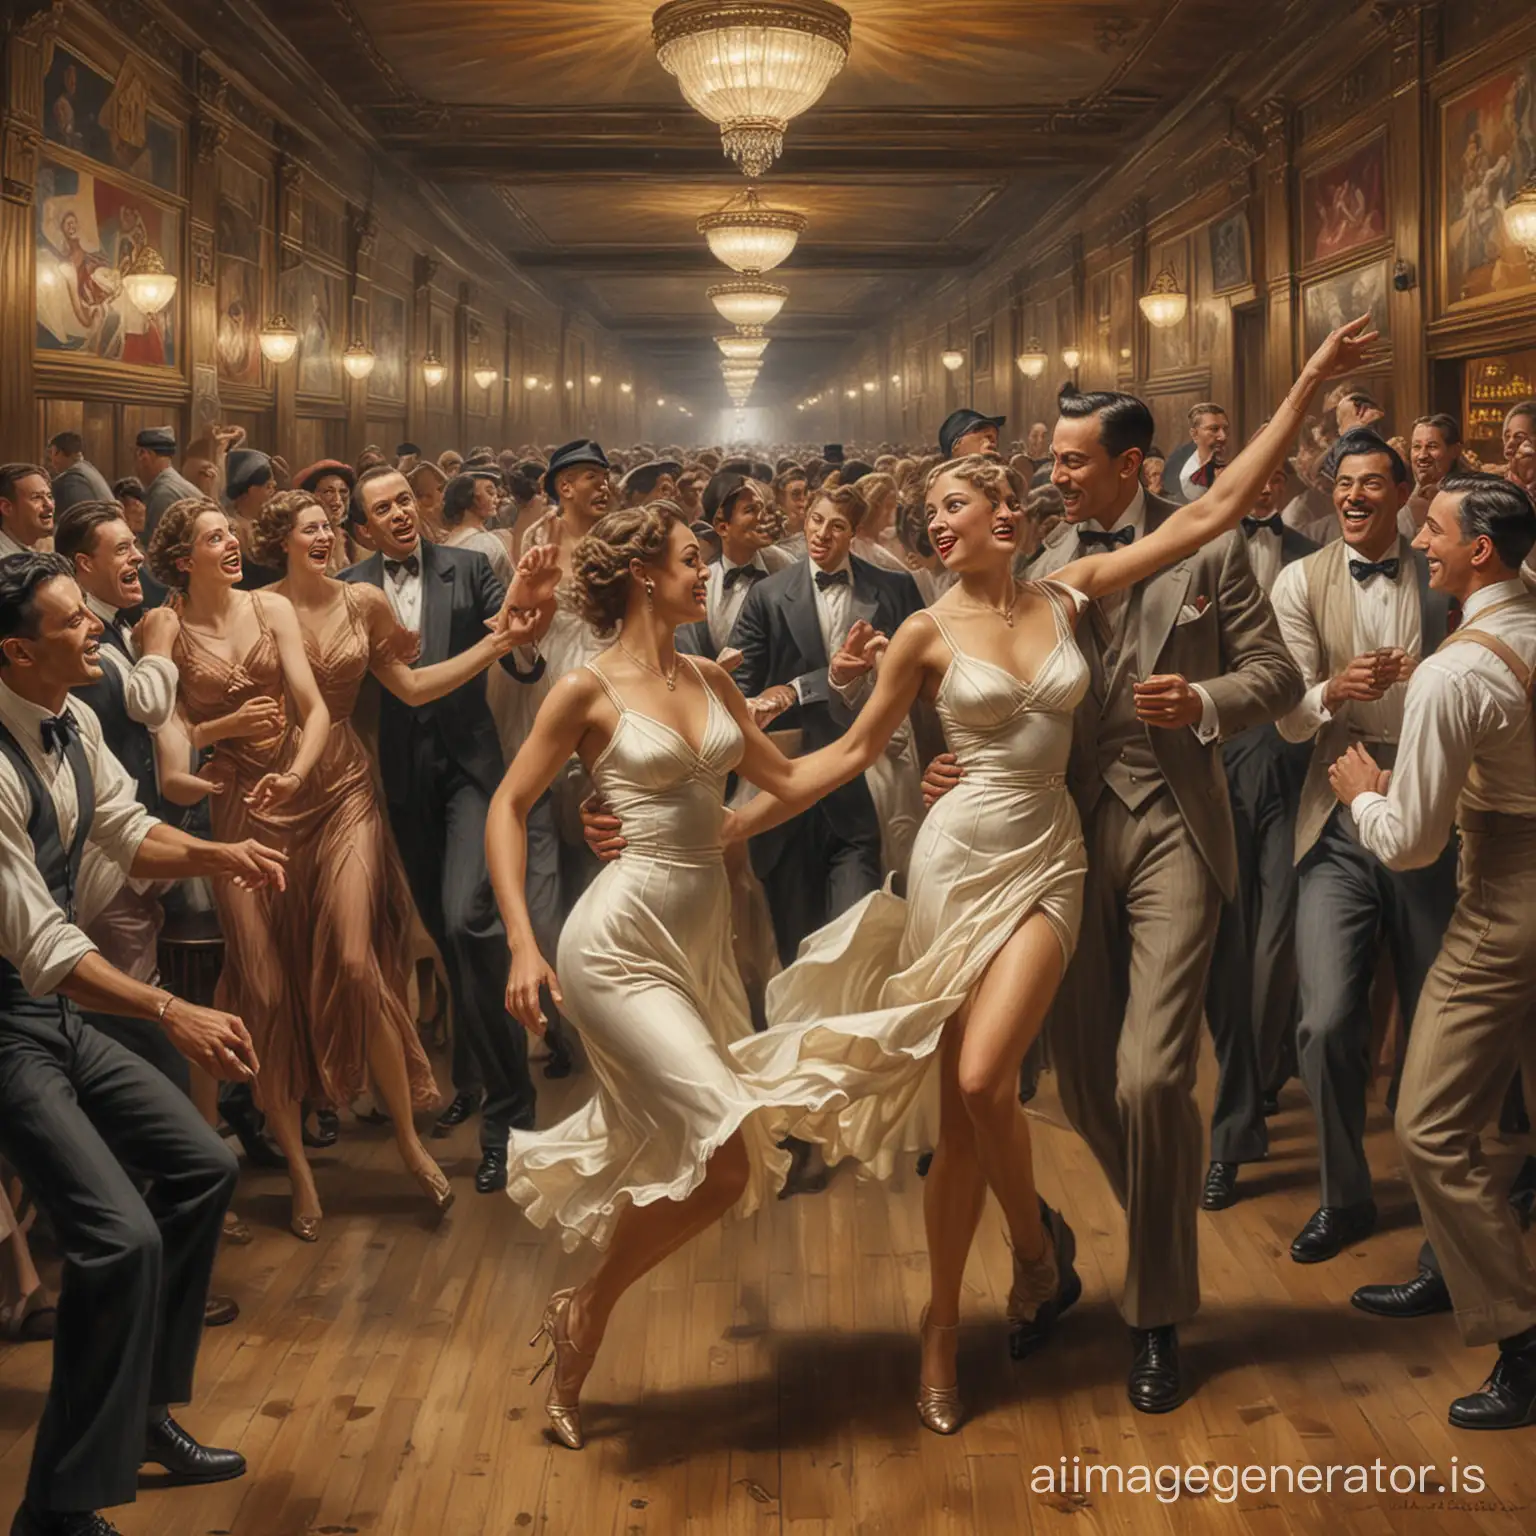 Imagine a bustling 1930s New York City dance hall, vibrant and teeming with life, through the eyes of Reginald Marsh, an artist known for his depictions of urban life and its dynamic human tableau. The scene is alive with movement; couples whirl across the dance floor, their forms blending into a symphony of motion. The air is charged with energy, the sounds of jazz and laughter melding into a rich tapestry of urban existence.

The composition captures the hall's grandeur and the patrons' exuberance, dressed in period attire that mirrors the fashion trends of the time. Marsh's characteristic style—detailed figures, expressive faces, and a sense of immediacy—brings the scene to life. The dance hall's architecture, with its ornate decorations and gleaming surfaces, frames the dancers, adding a sense of depth and scale.

In the foreground, a diverse array of dancers captures the viewer's attention, each movement suggesting a story untold. The background offers glimpses of onlookers, their expressions ranging from joy to envy, encapsulating the human drama that Marsh was so adept at portraying. The lighting is strategic, highlighting the dancers' motion and the hall's architectural details, creating a contrast that underscores the vibrancy of the scene.

This image, infused with the spirit of Reginald Marsh's work, invites the viewer to step into a moment of historical and cultural significance, a celebration of life's fleeting pleasures captured in the dance hall's ephemeral beauty.